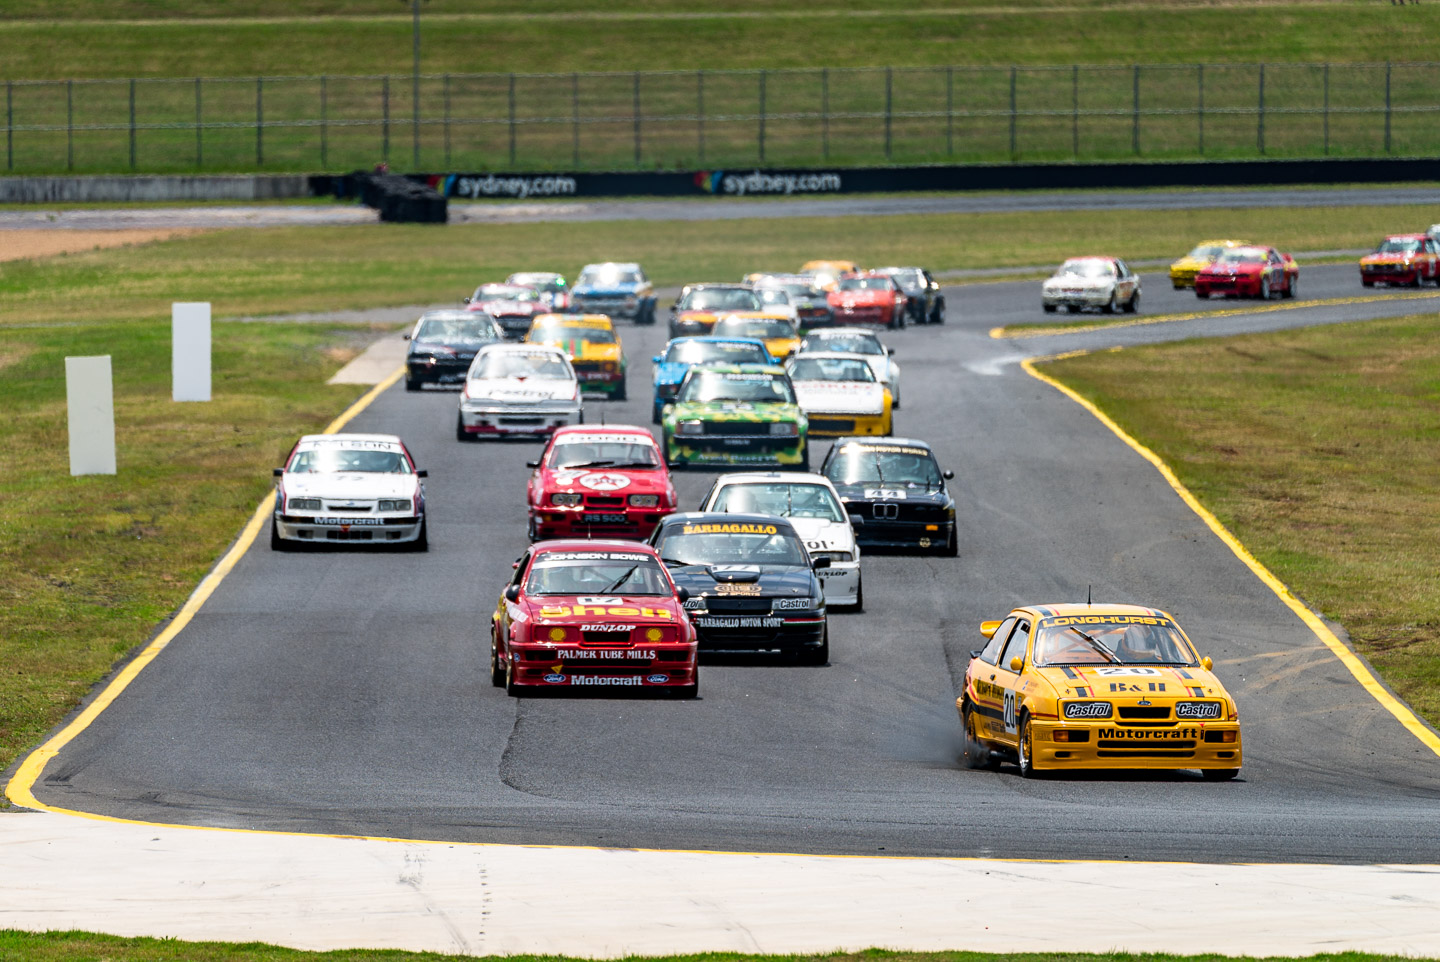 Heritage Touring Cars